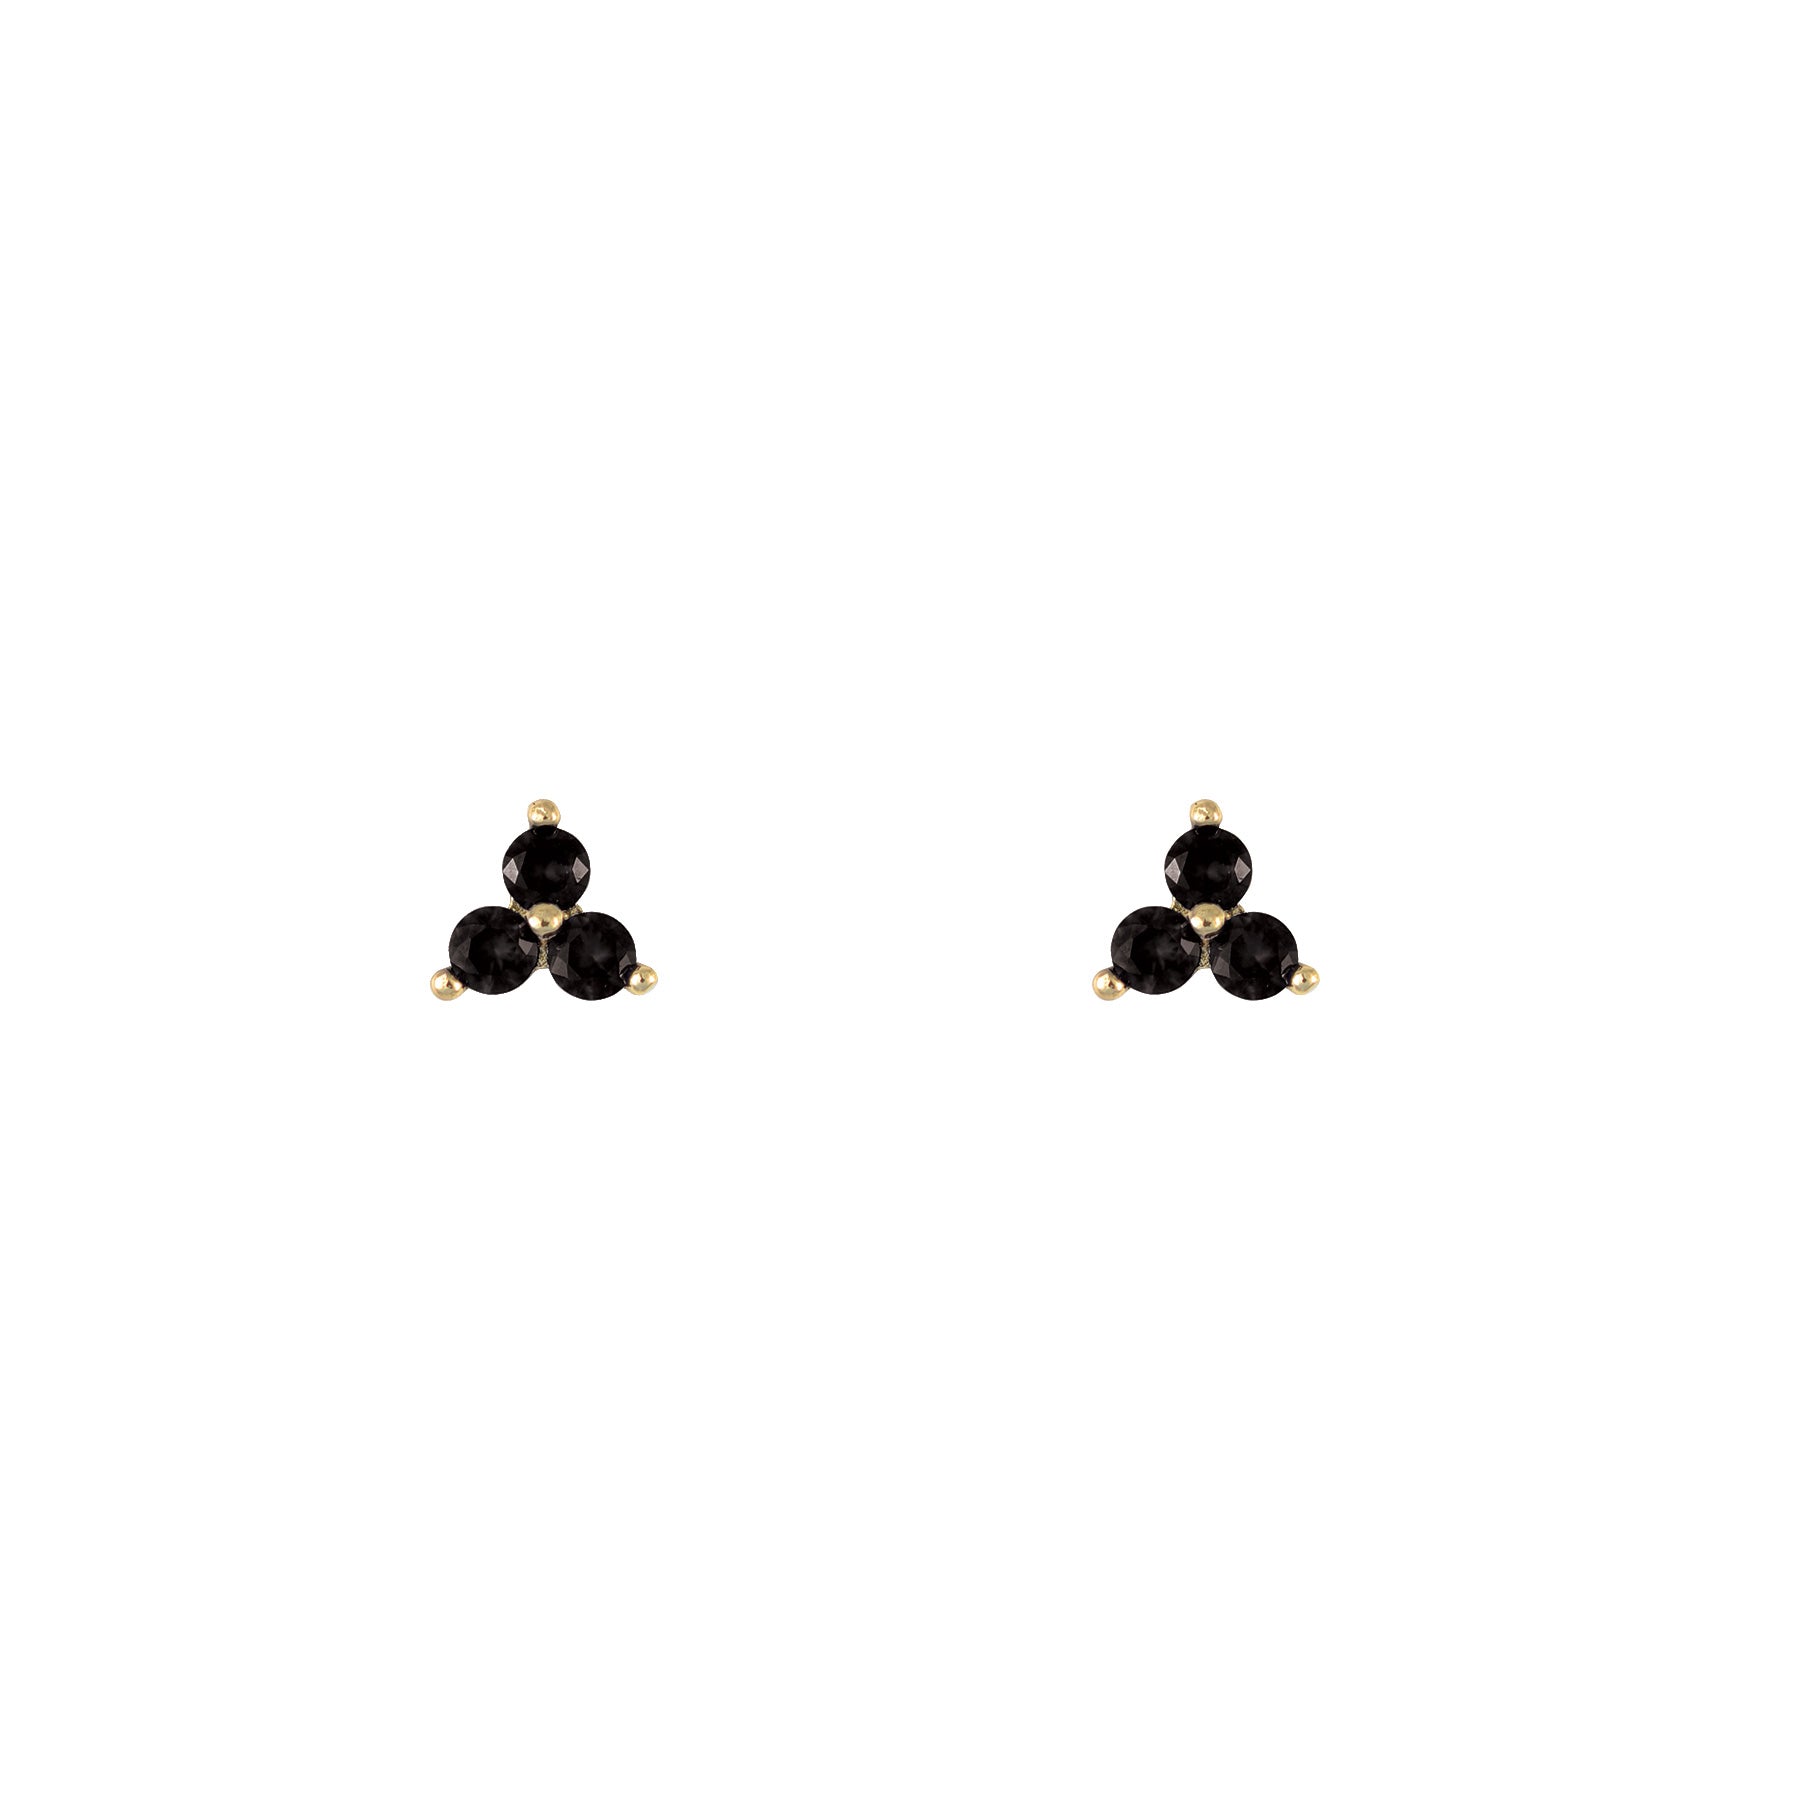 Small gold and black winter flowers earrings